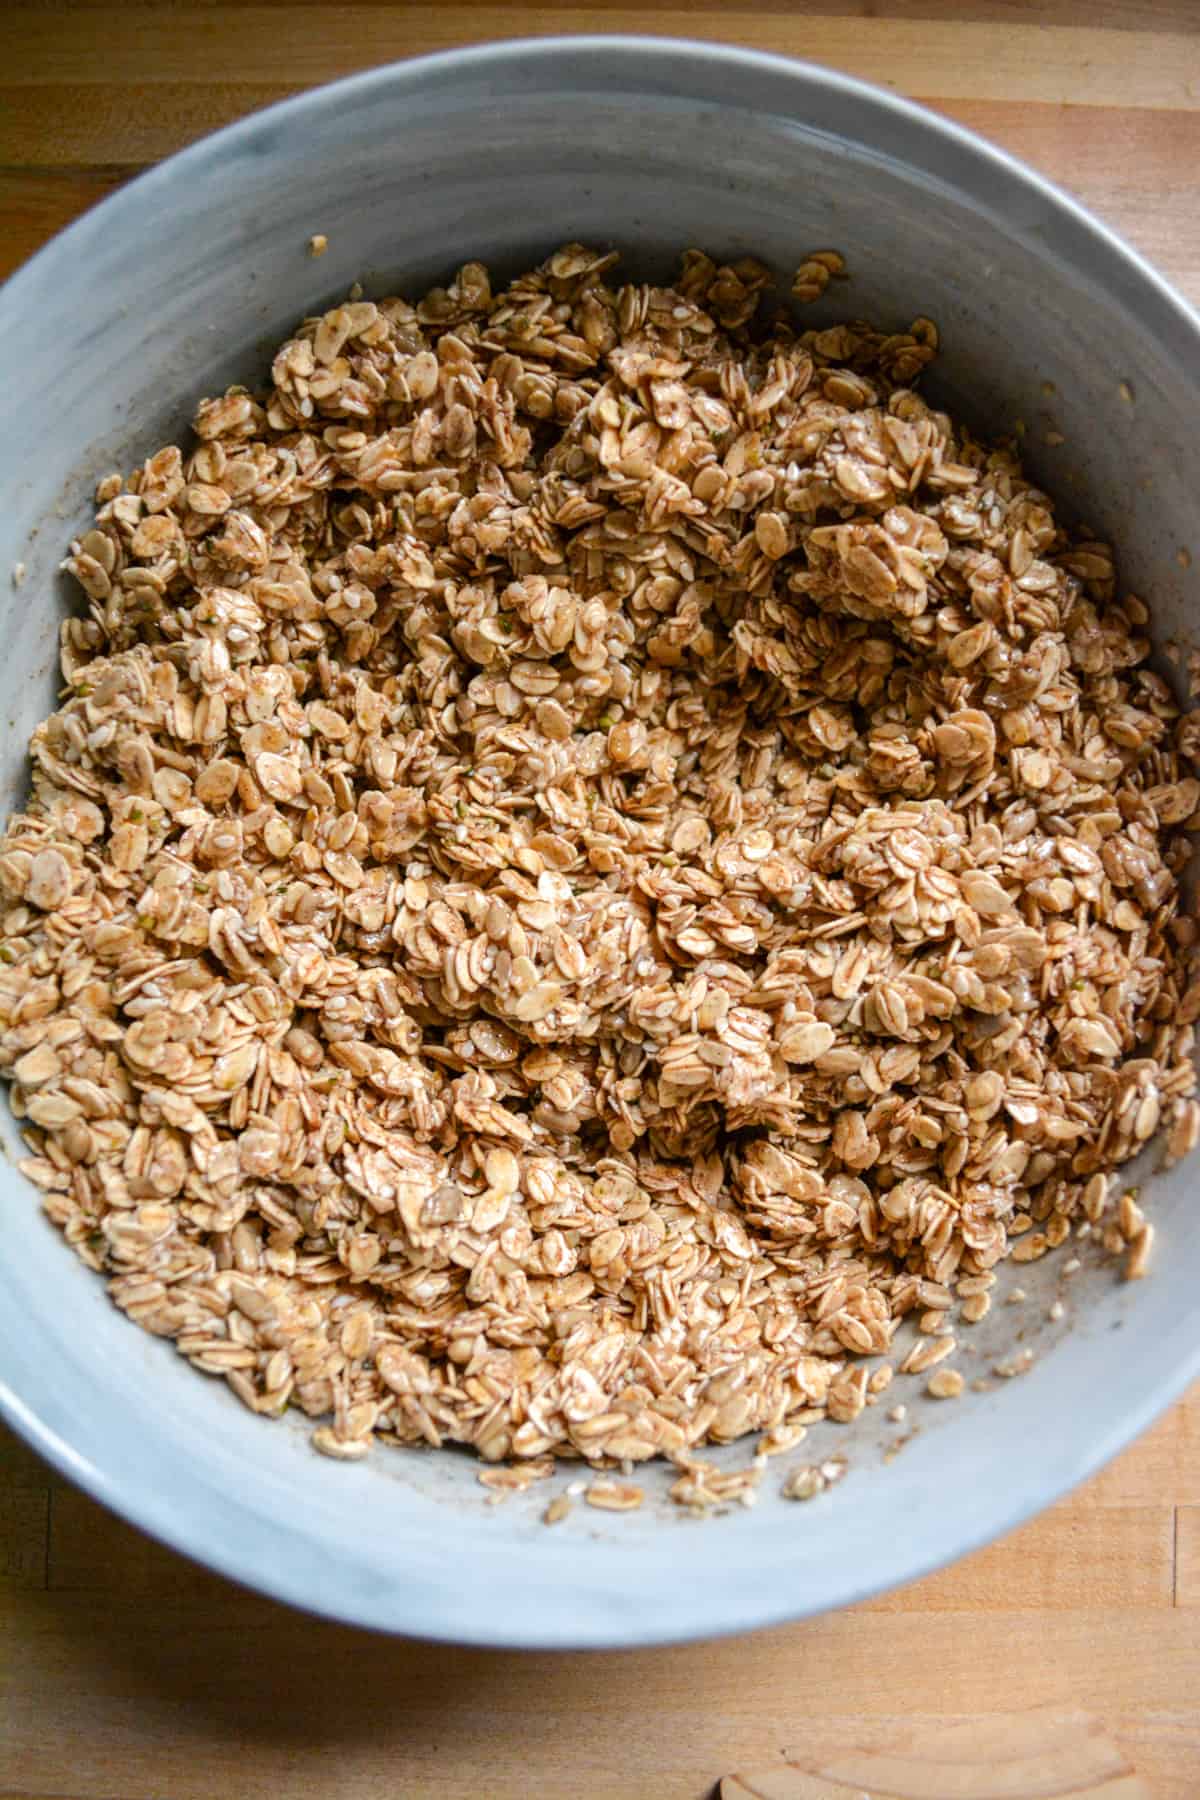 Oats mixed together with the wet ingredients in a mixing bowl.